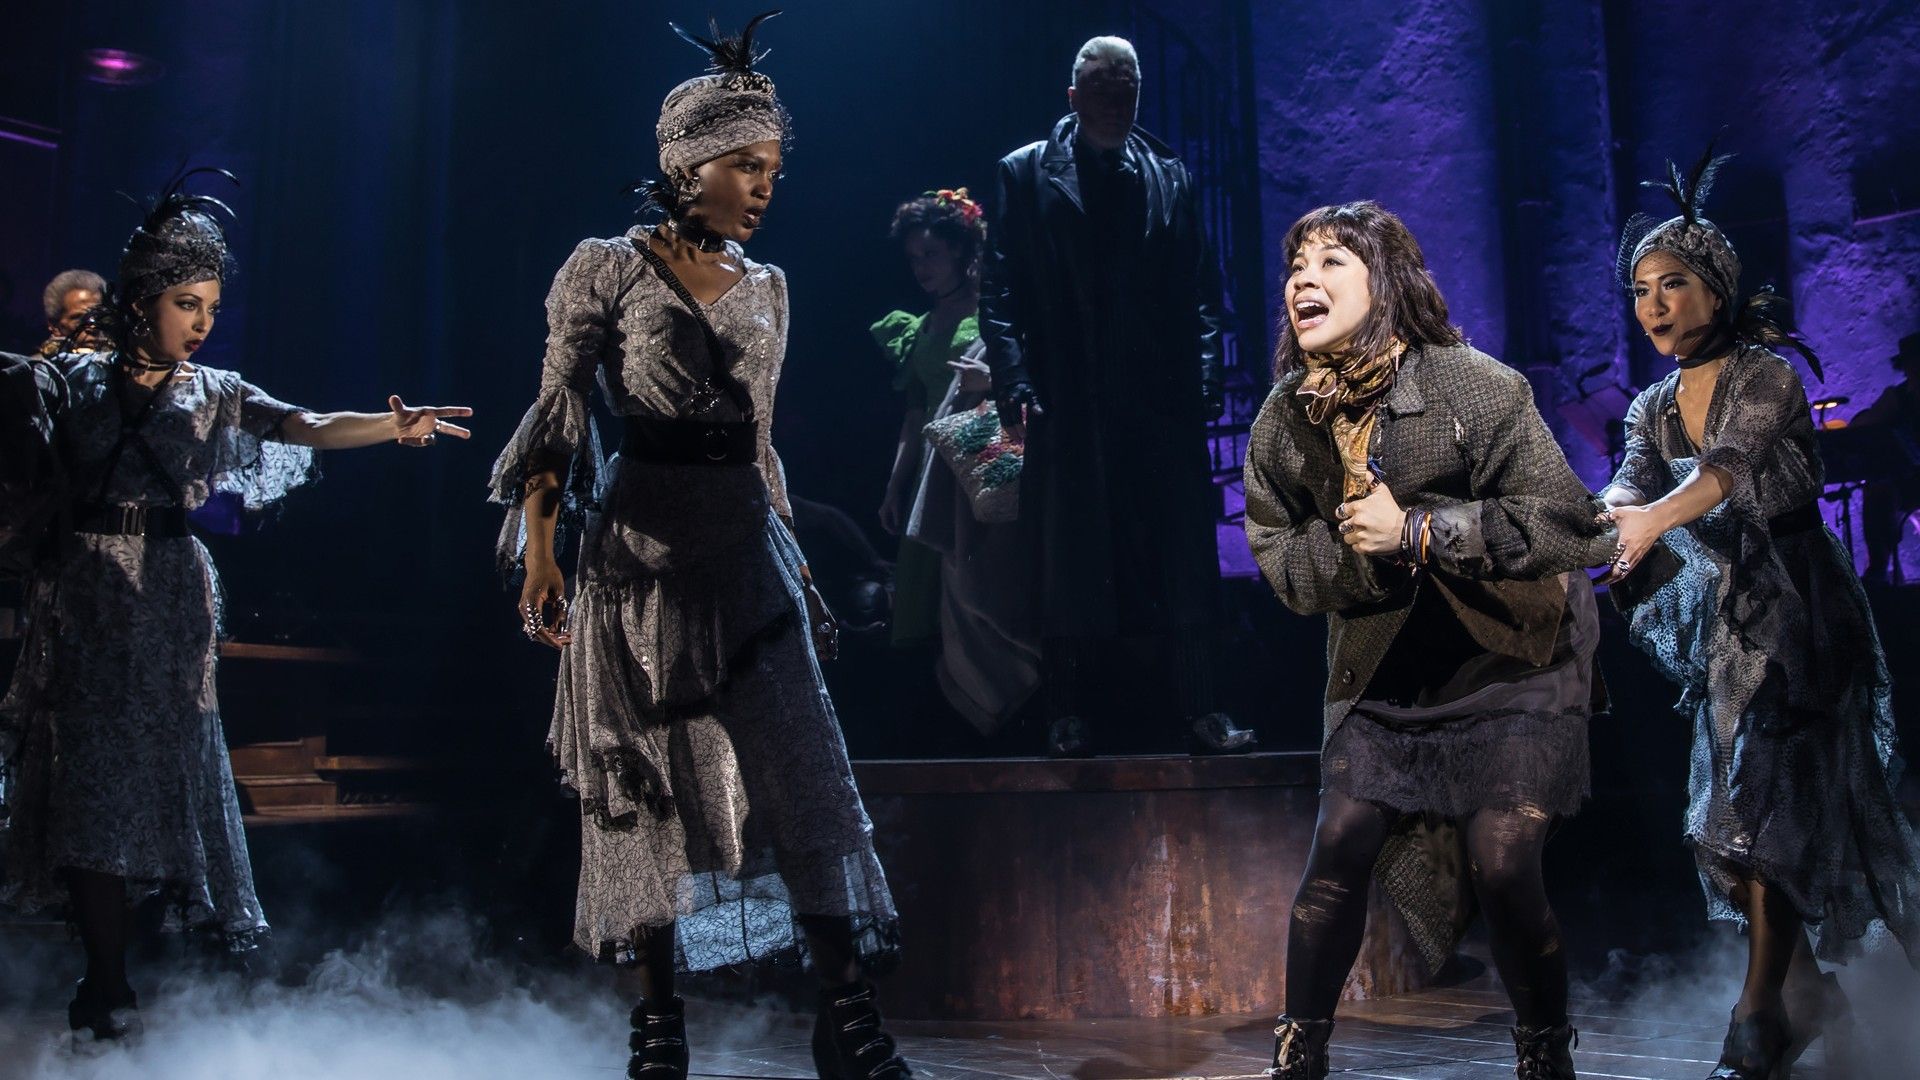 Little Songbird: Backstage at 'Hadestown' with Eva Noblezada background